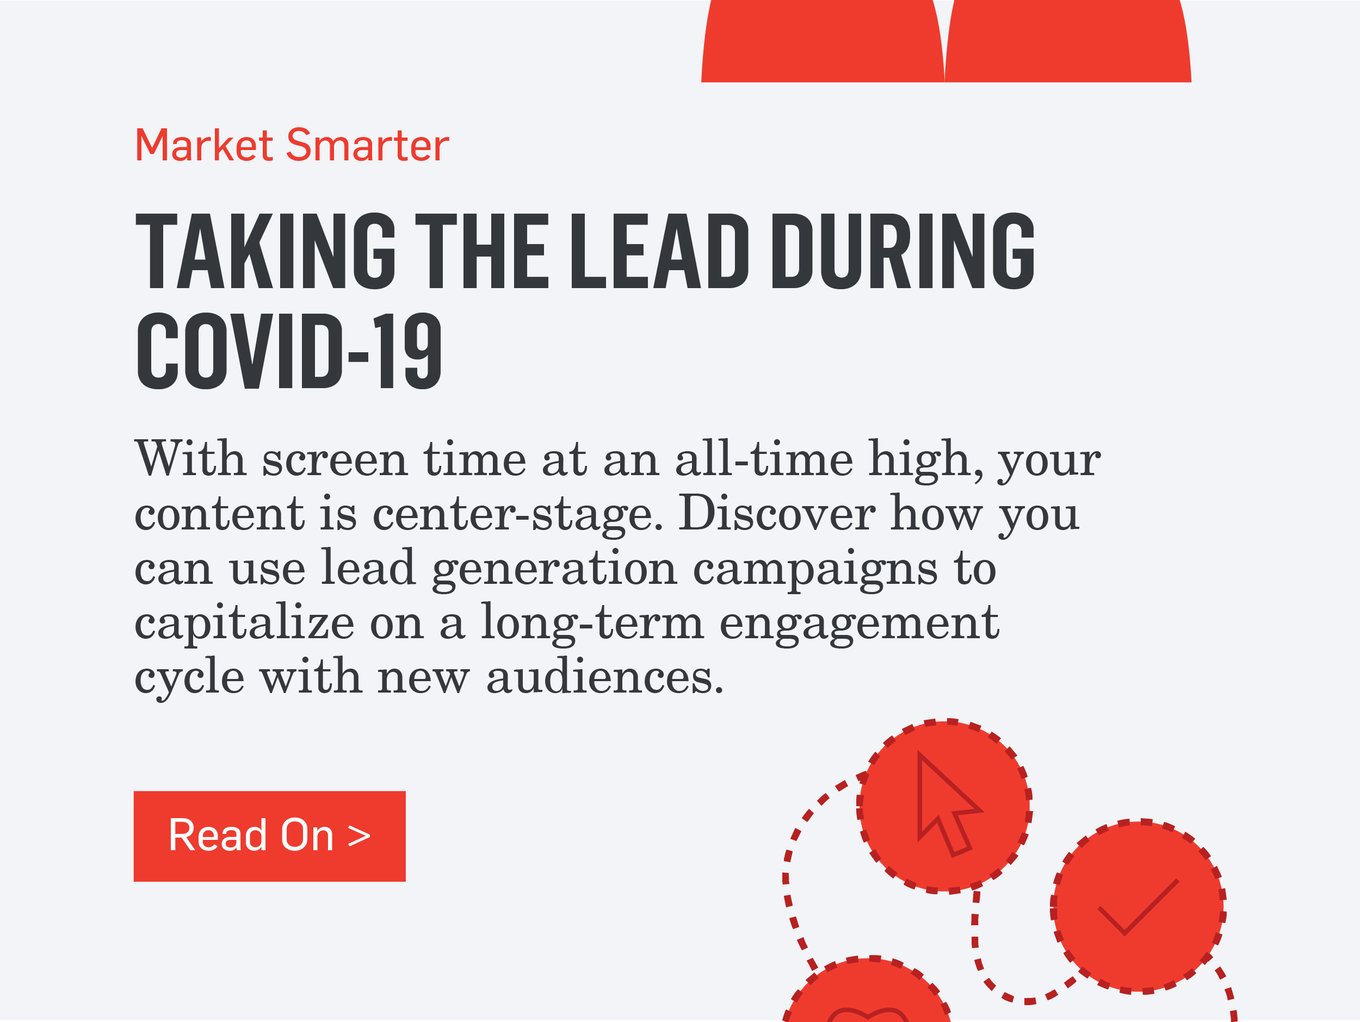 Market Smarter - TAKING THE LEAD DURING COVID-19 - With screen time at an all-time high, your content is center-stage. Discover how you can use lead generation campaigns to capitalize on a long-term engagement cycle with new audiences. >>>Read On>>>